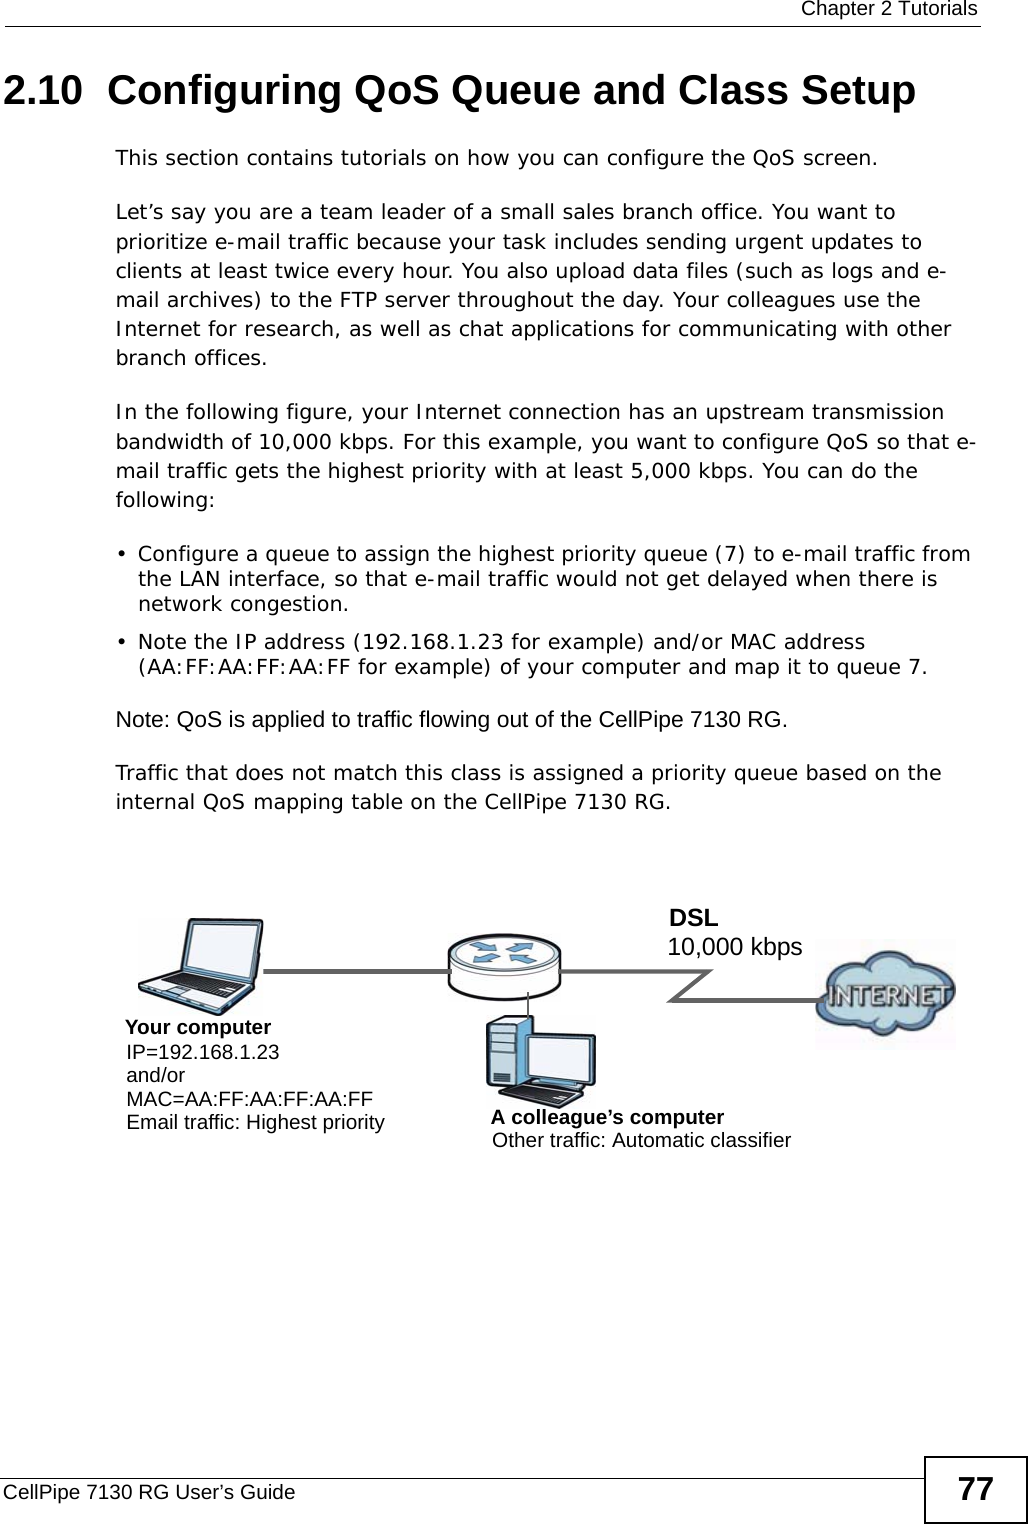  Chapter 2 TutorialsCellPipe 7130 RG User’s Guide 772.10  Configuring QoS Queue and Class SetupThis section contains tutorials on how you can configure the QoS screen.Let’s say you are a team leader of a small sales branch office. You want to prioritize e-mail traffic because your task includes sending urgent updates to  clients at least twice every hour. You also upload data files (such as logs and e-mail archives) to the FTP server throughout the day. Your colleagues use the Internet for research, as well as chat applications for communicating with other branch offices.In the following figure, your Internet connection has an upstream transmission bandwidth of 10,000 kbps. For this example, you want to configure QoS so that e-mail traffic gets the highest priority with at least 5,000 kbps. You can do the following:• Configure a queue to assign the highest priority queue (7) to e-mail traffic from the LAN interface, so that e-mail traffic would not get delayed when there is network congestion. • Note the IP address (192.168.1.23 for example) and/or MAC address (AA:FF:AA:FF:AA:FF for example) of your computer and map it to queue 7. Note: QoS is applied to traffic flowing out of the CellPipe 7130 RG.Traffic that does not match this class is assigned a priority queue based on the internal QoS mapping table on the CellPipe 7130 RG.QoS Exampl e10,000 kbpsDSLYour computerIP=192.168.1.23A colleague’s computer Other traffic: Automatic classifierand/orMAC=AA:FF:AA:FF:AA:FFEmail traffic: Highest priority